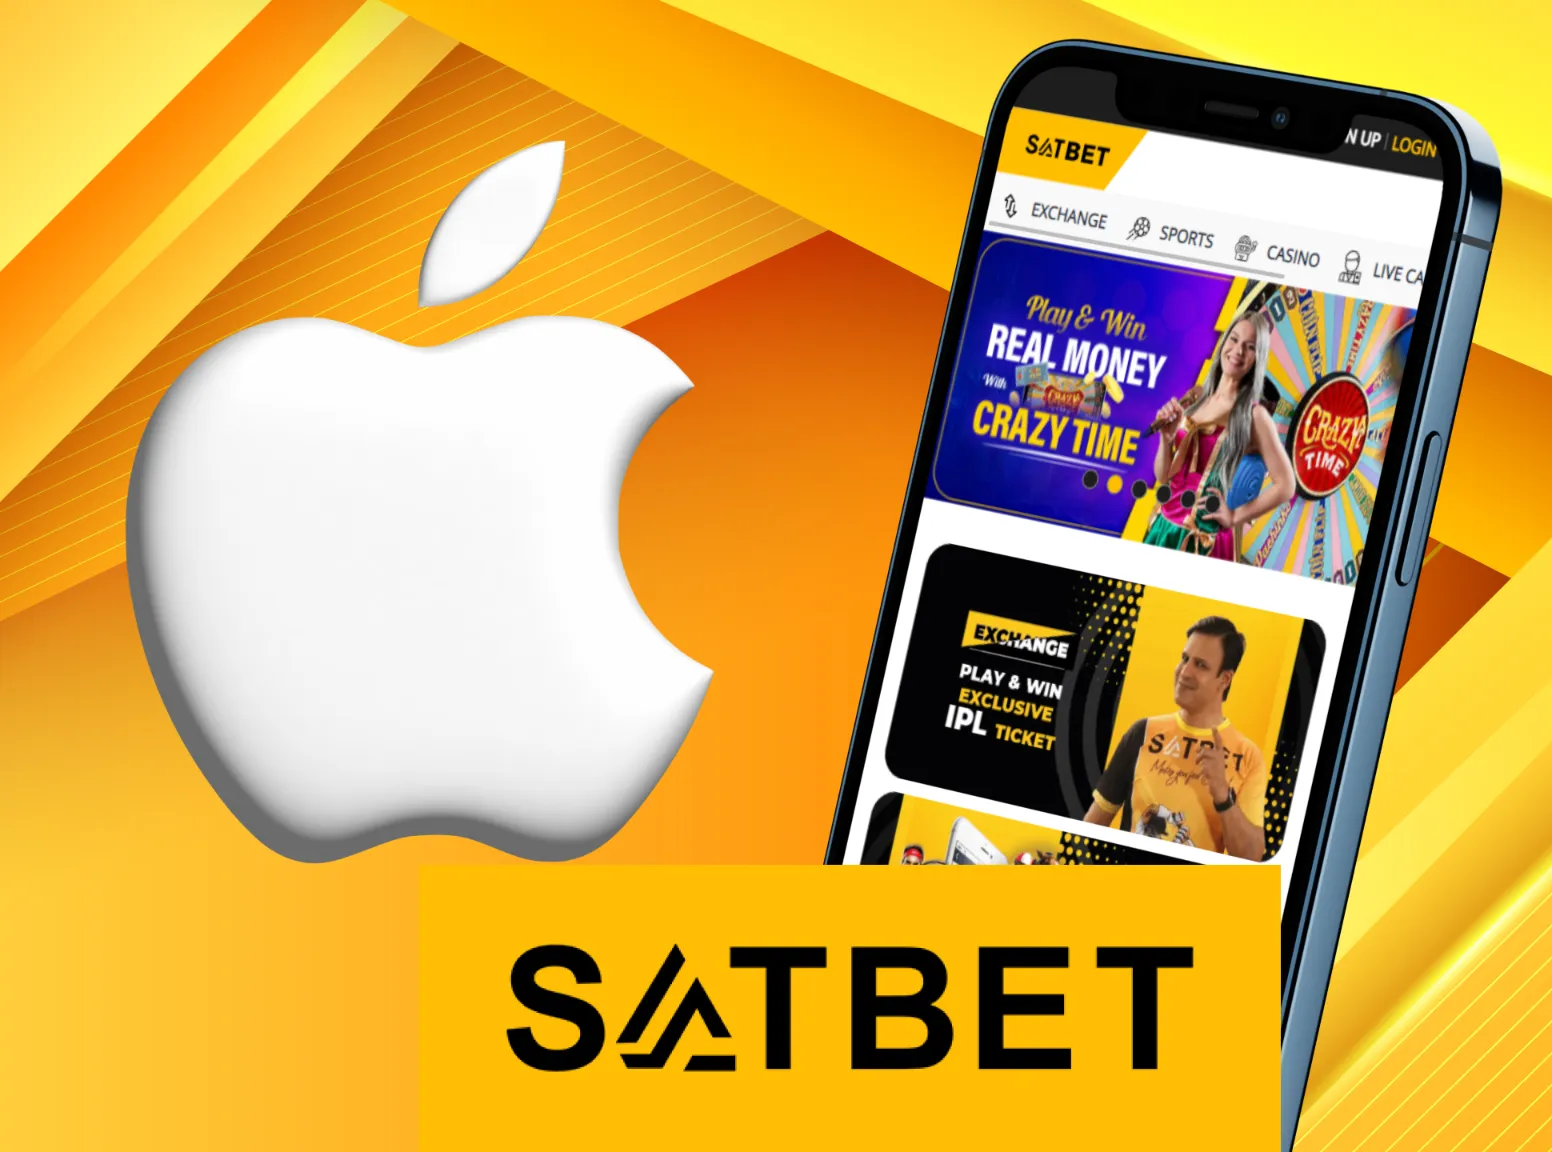 You can install Satbet iOS app on any modern Apple device.